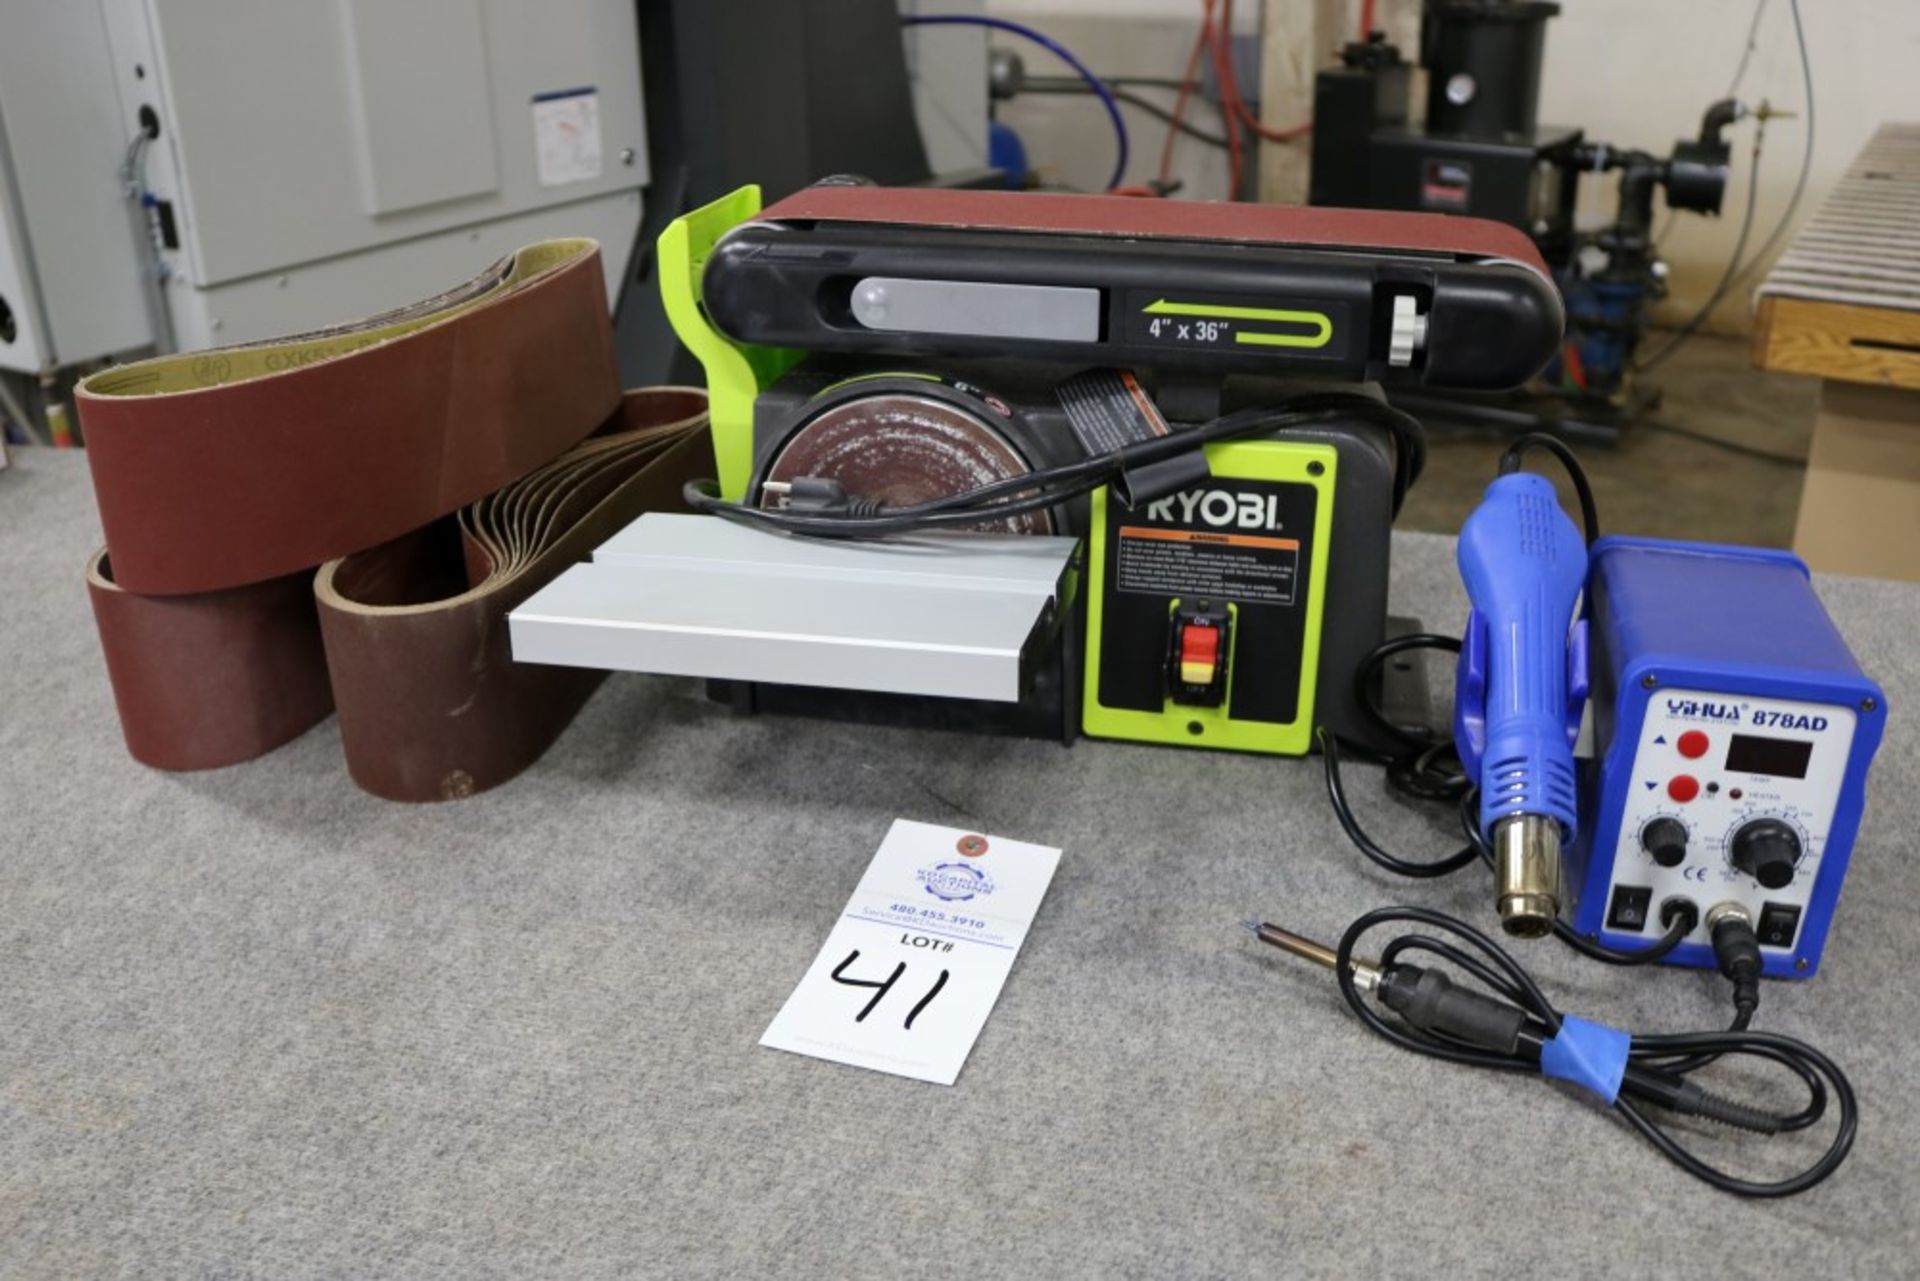 Ryobi 4" x 6" Belt and Disc Sander with Extra New Sanding Belts, also YiHua 878 AD- SMD ReWork - Image 9 of 9